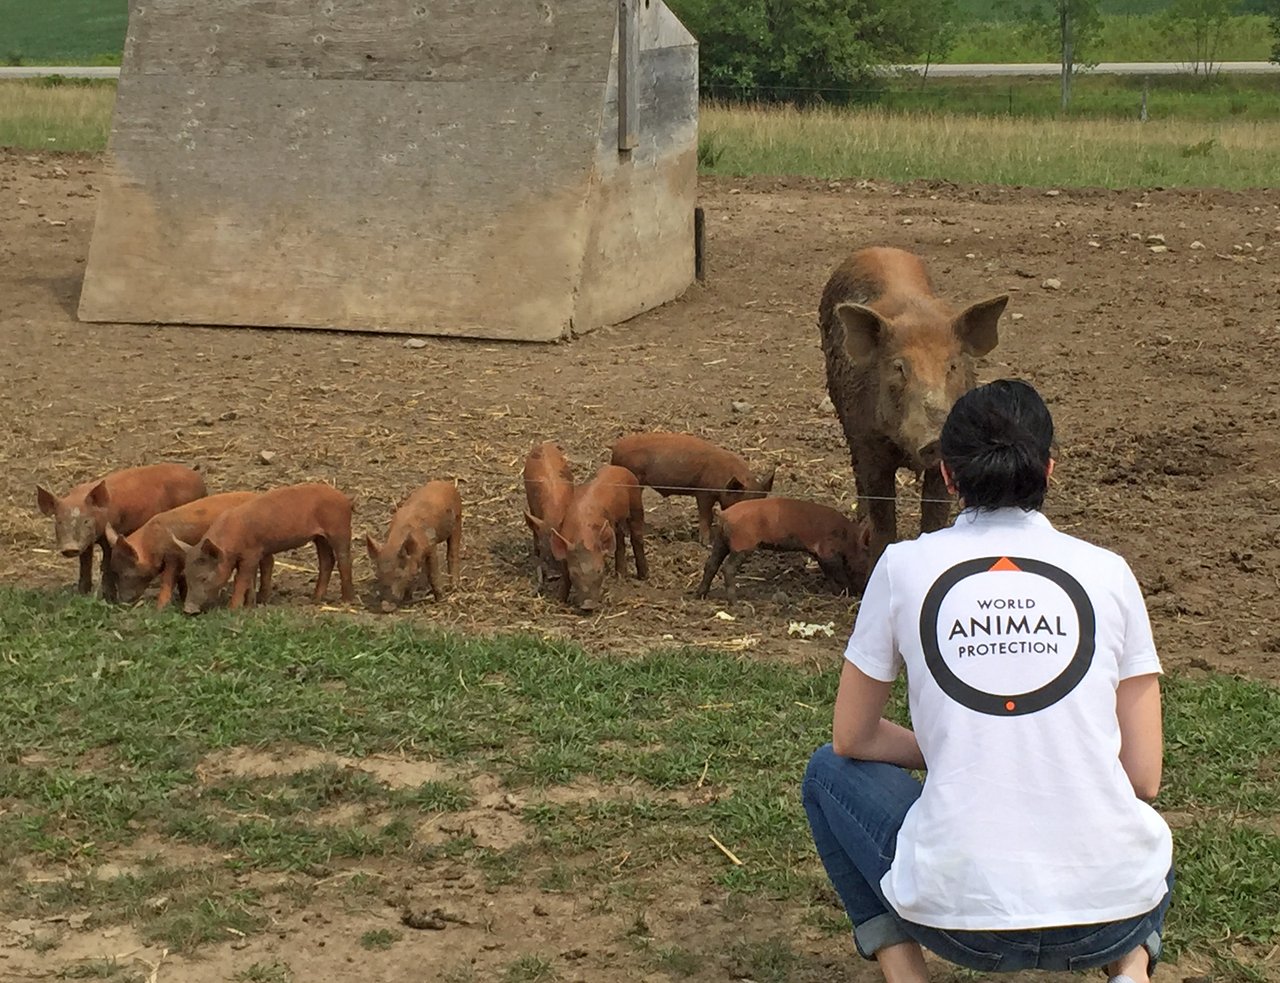 World Animal Protection staff with piglets in the background